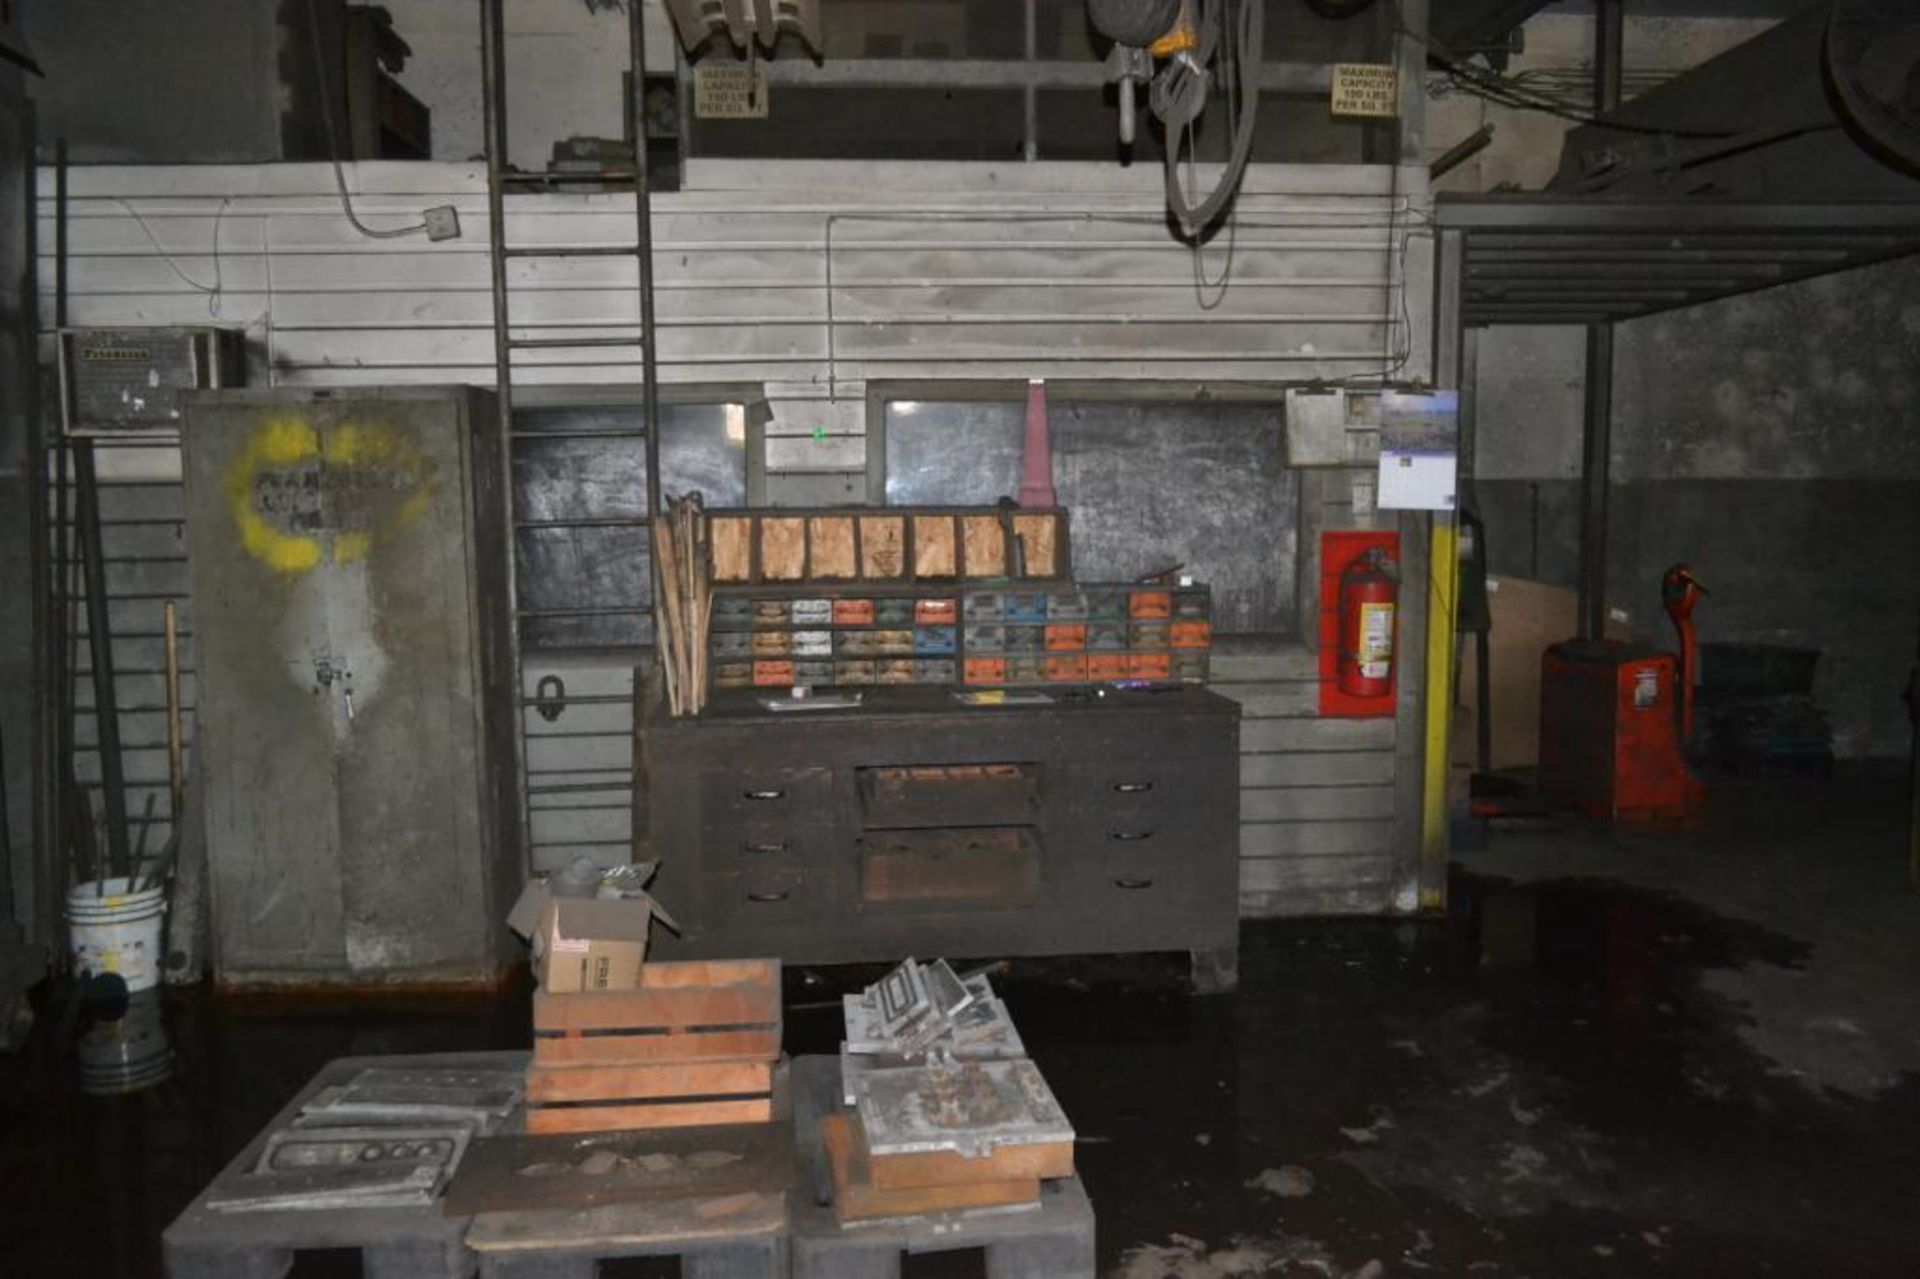 LOT: Remaining Contents of Basement Room including Tool Boxes, Hand Tools, Steel Horses, Furniture